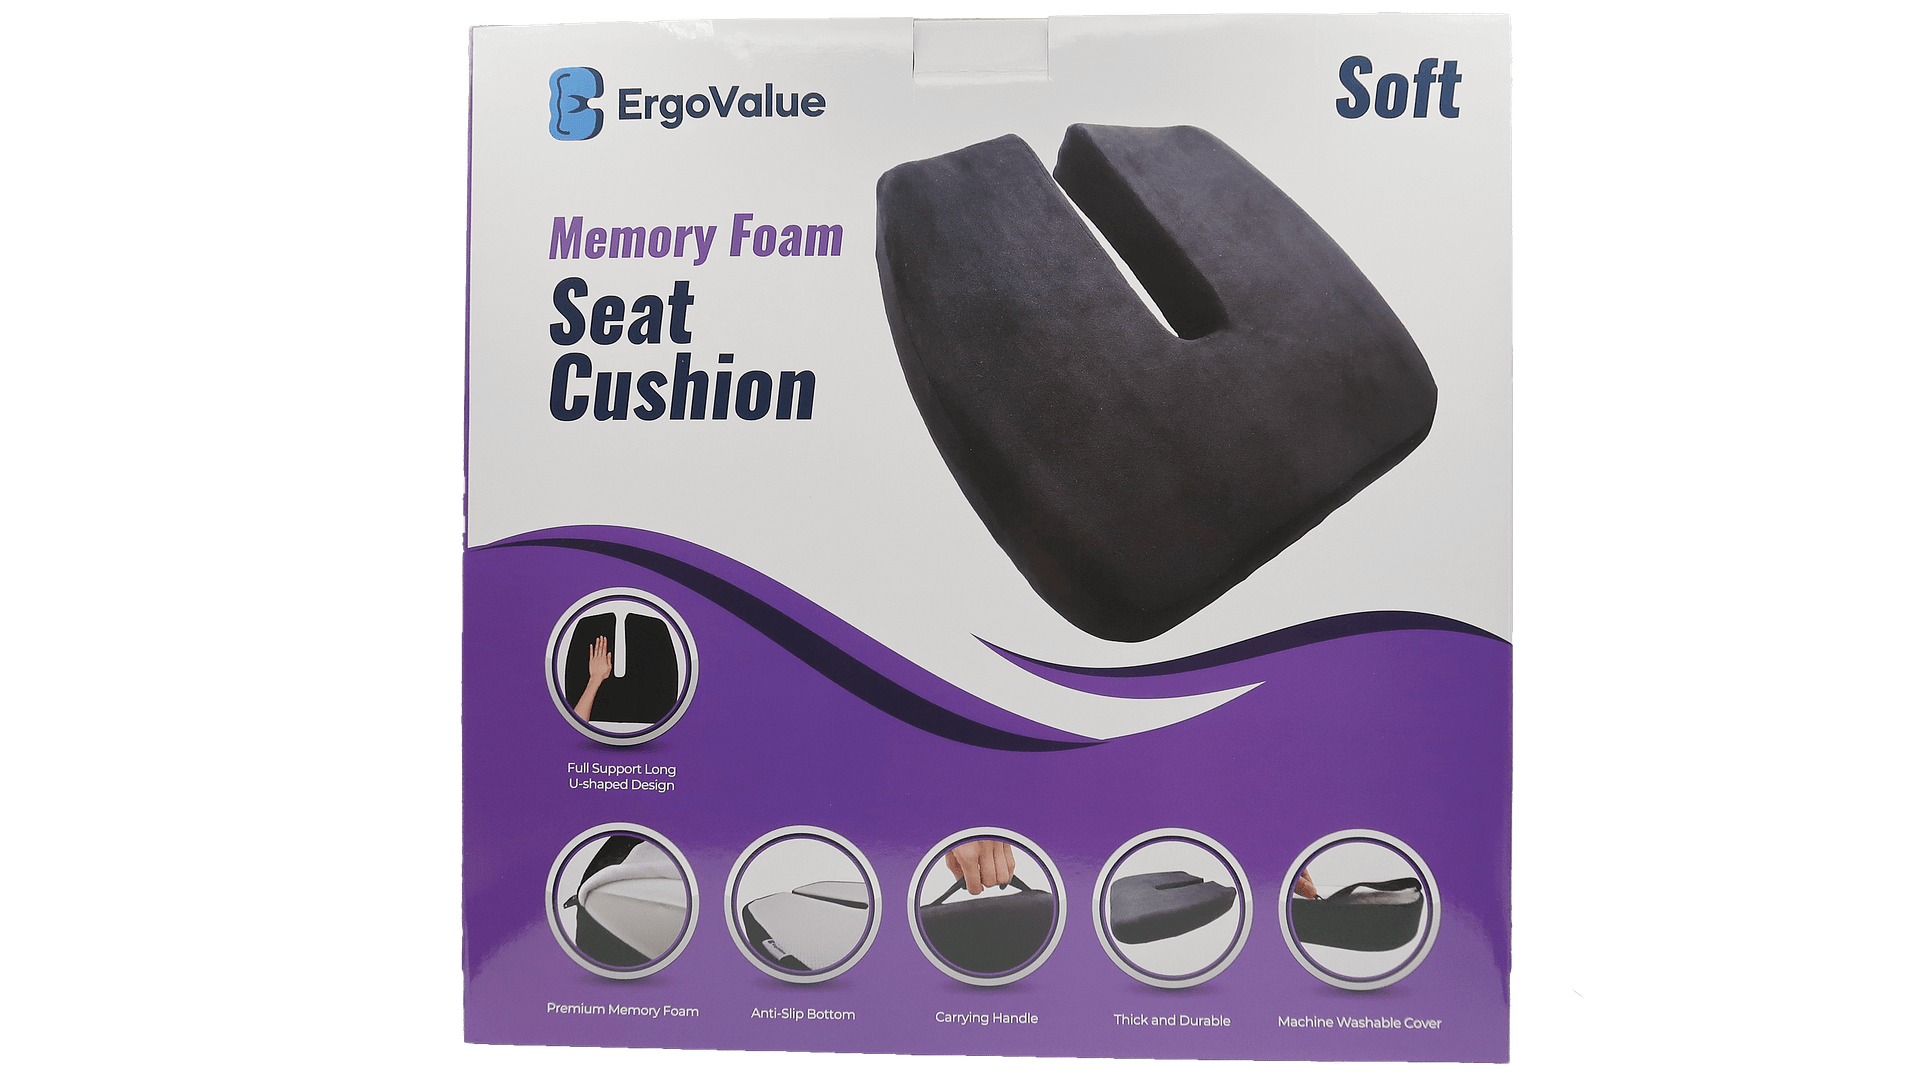 Best Memory Foam Chair cushion for Coccyx Tailbone & Spine support